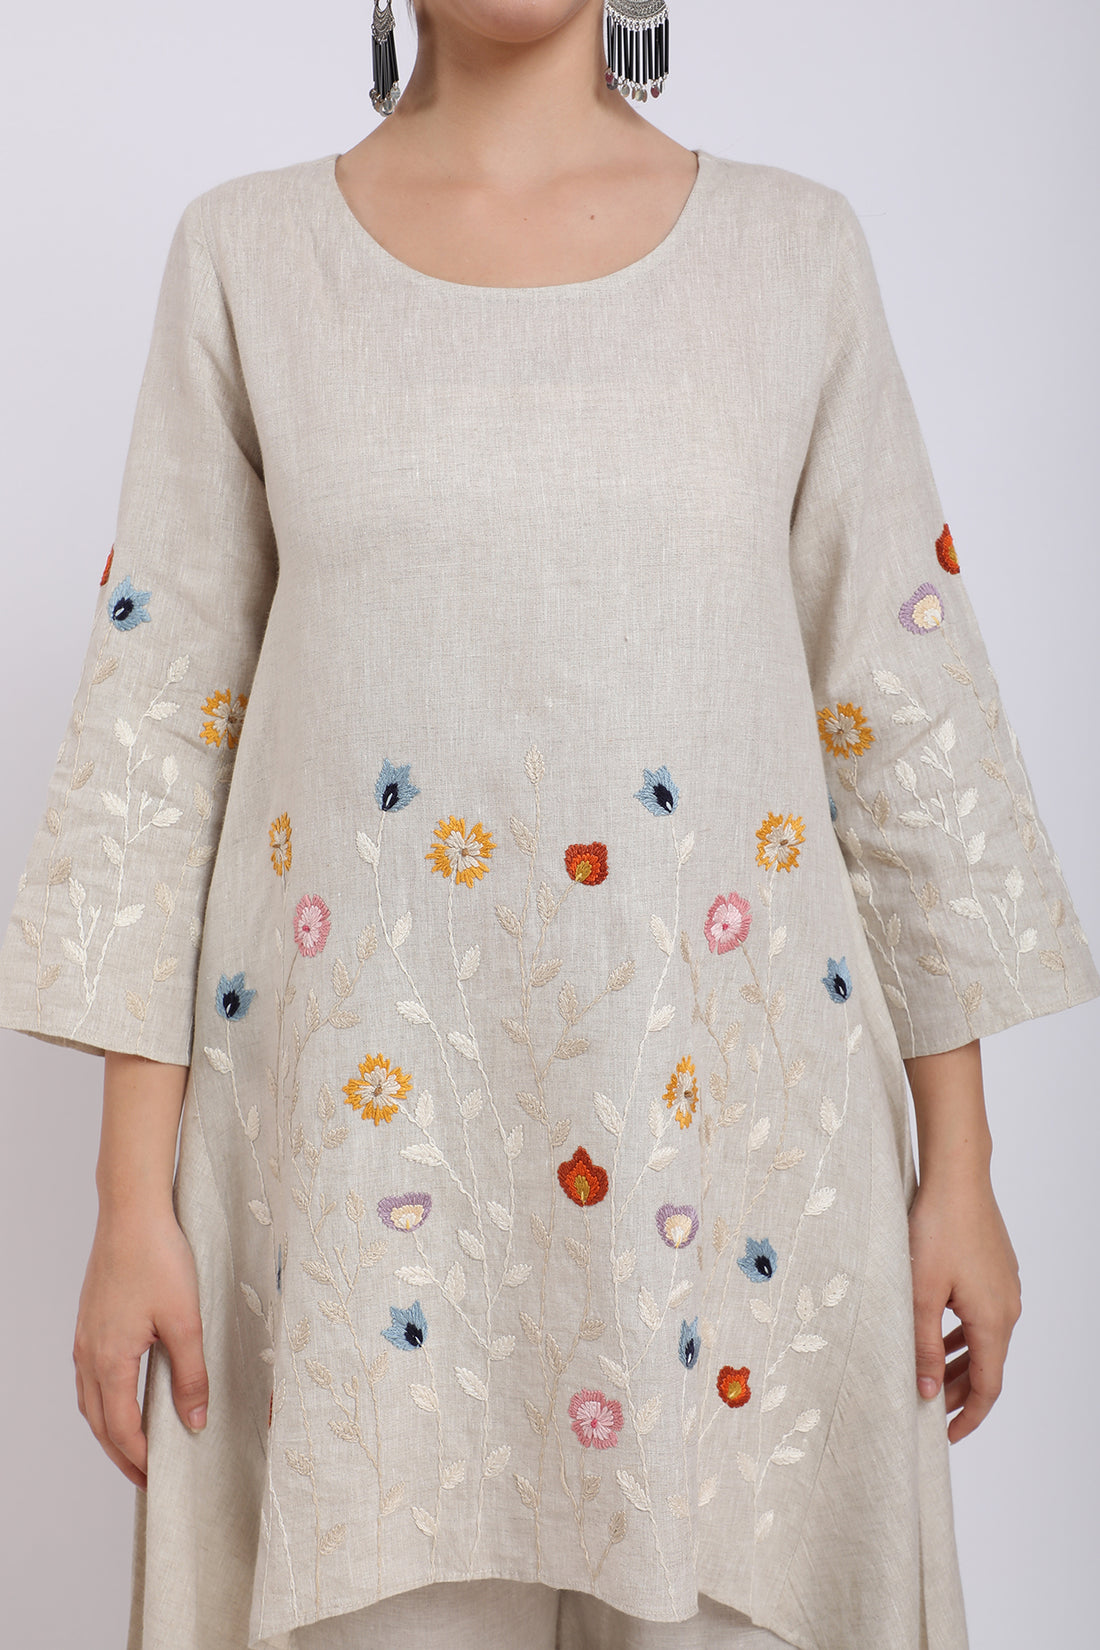 Beige Hand Embroidered High-Low Tunic